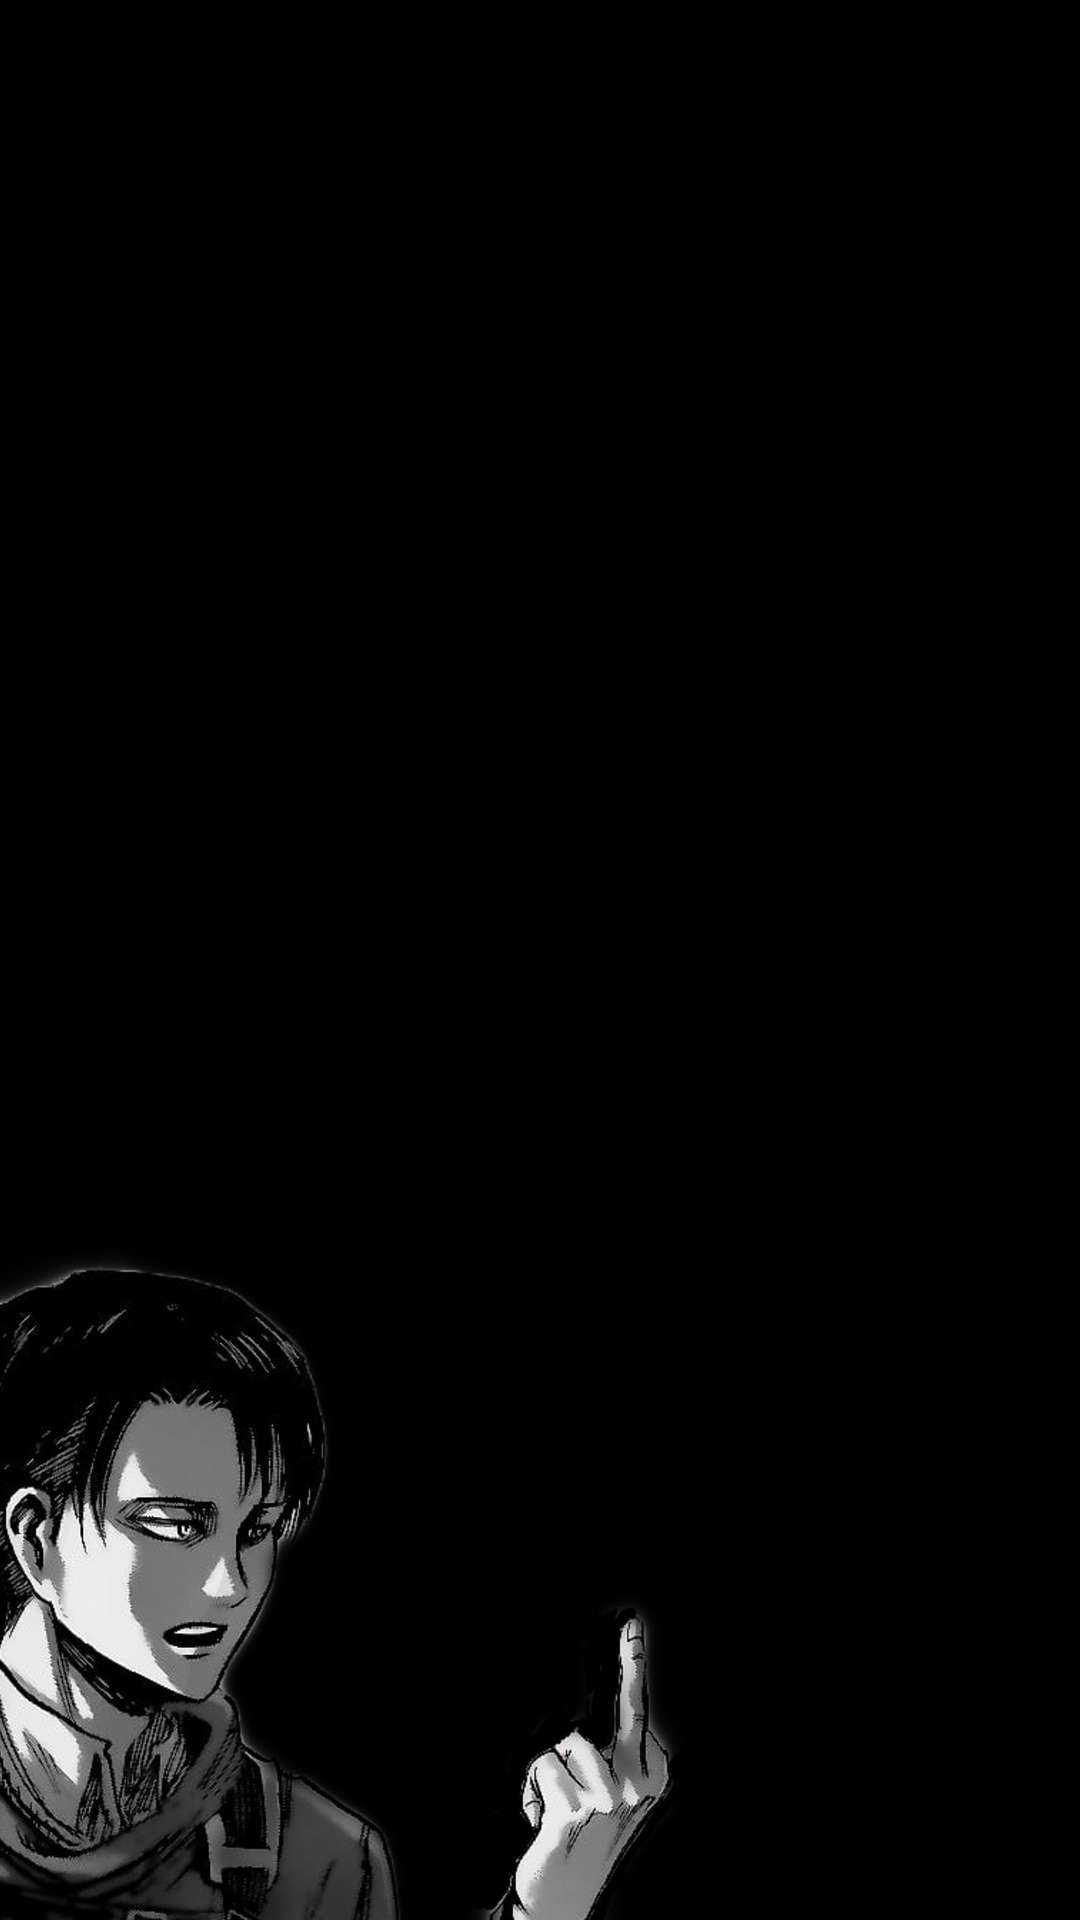 79 Levi Ackerman Wallpapers for iPhone and Android by Carla Carrillo